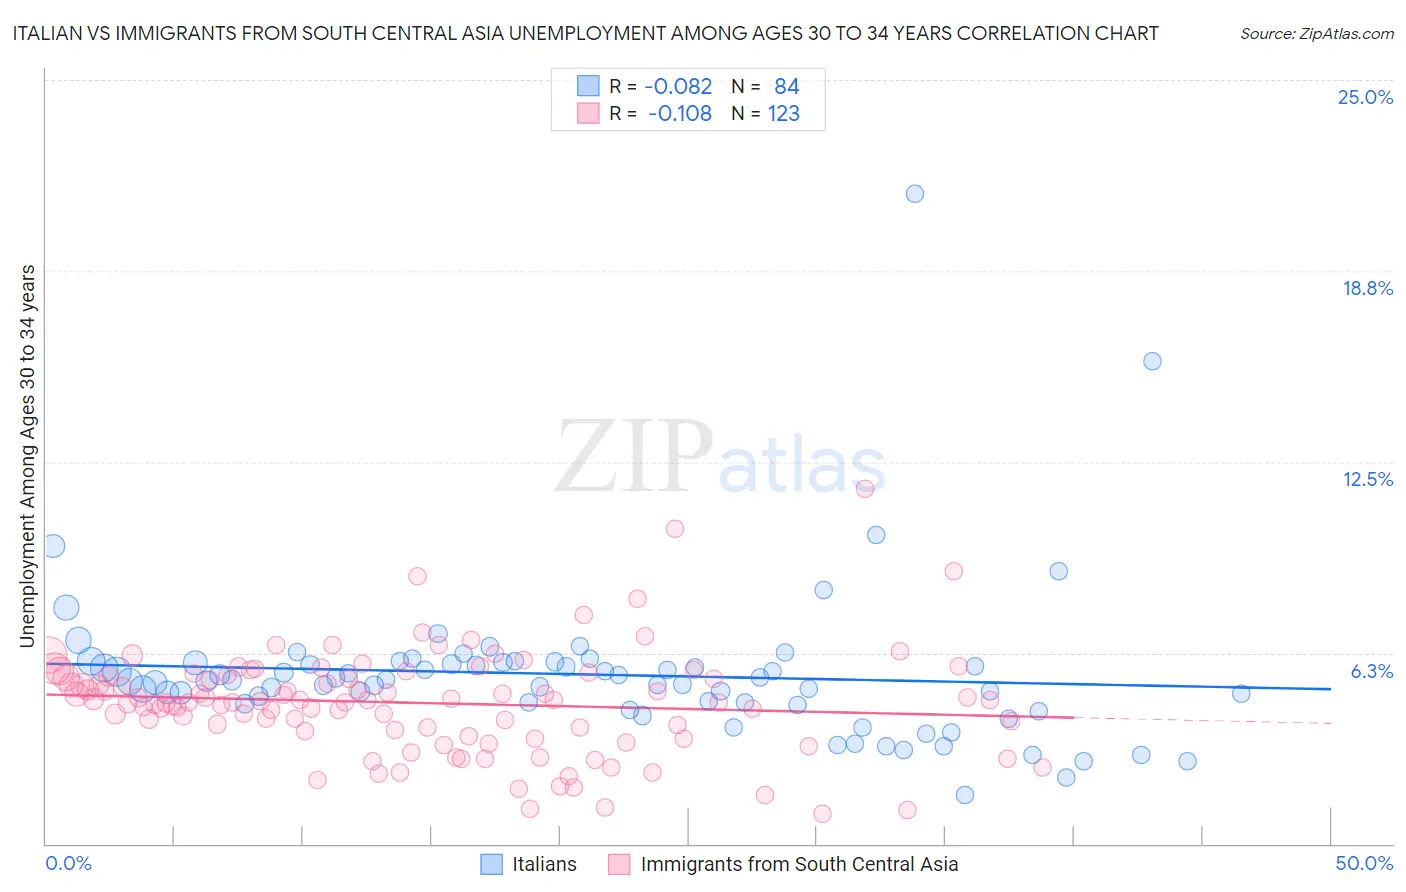 Italian vs Immigrants from South Central Asia Unemployment Among Ages 30 to 34 years